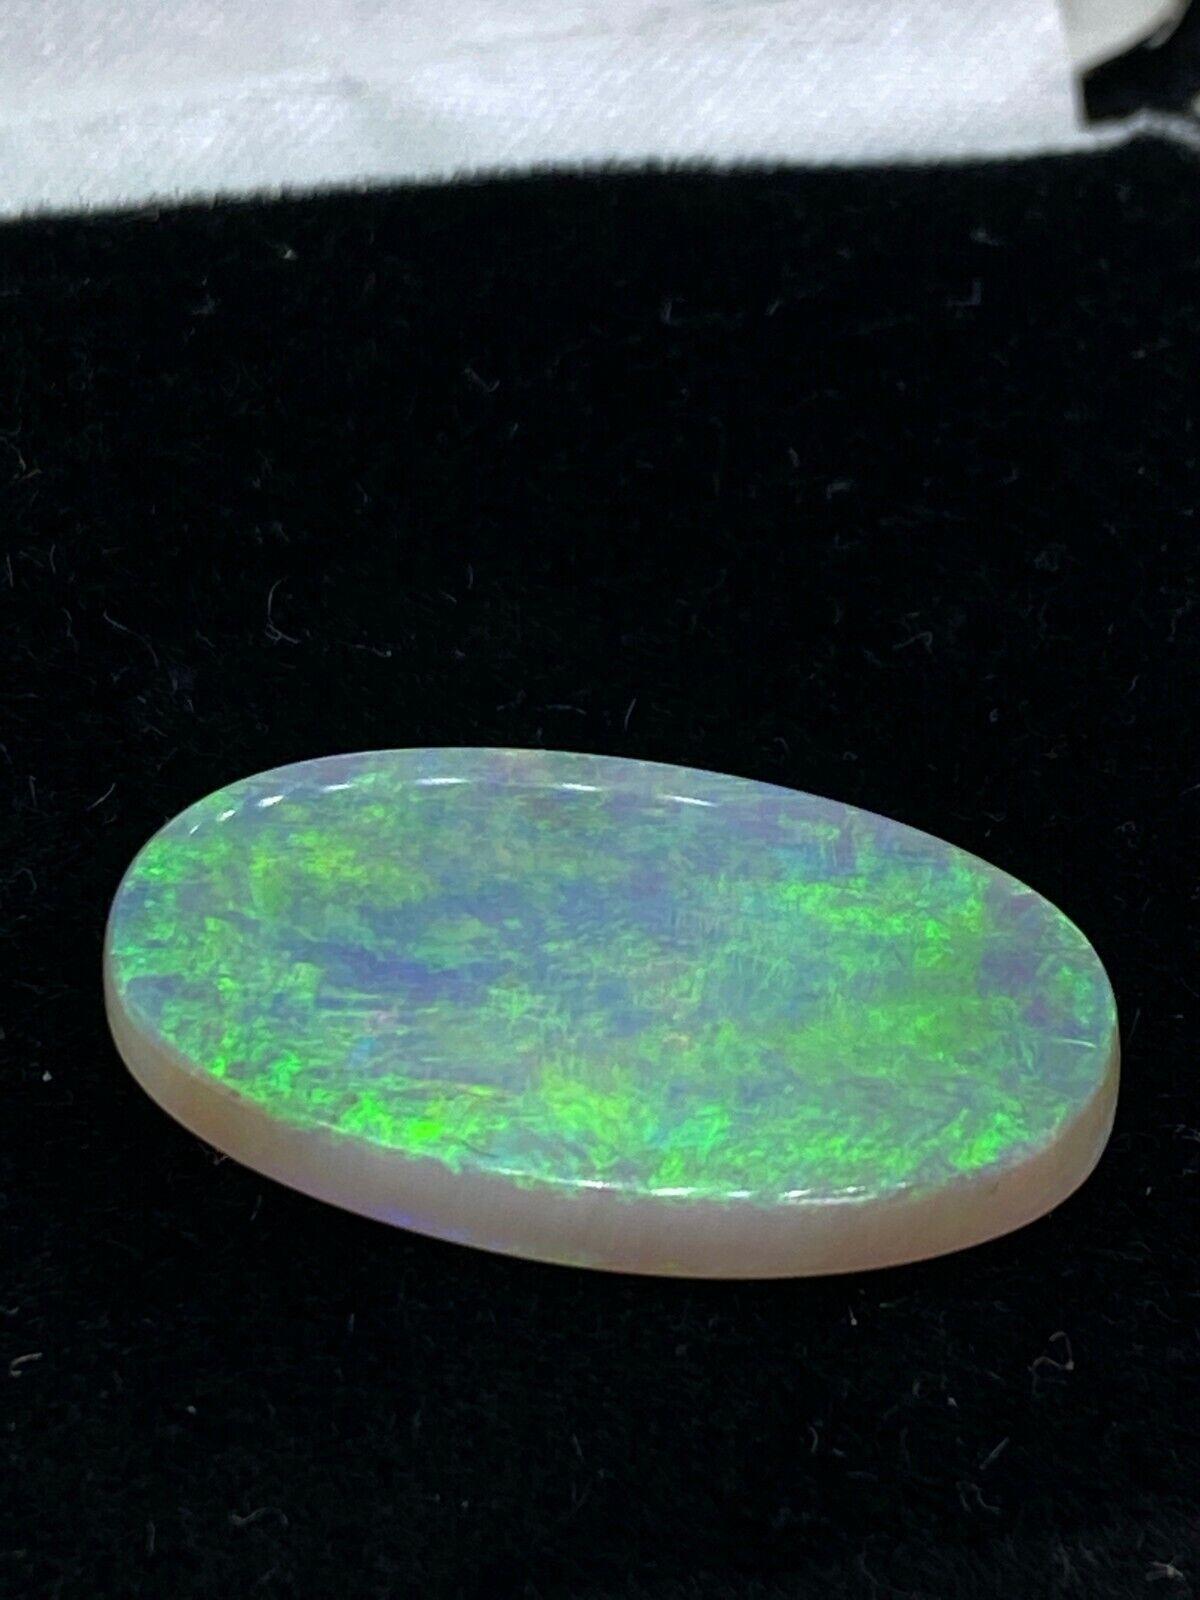 Oval Cut 10.32ct Oval Cabochon Cut Loose Australian Opal. Valued at $10000. For Sale